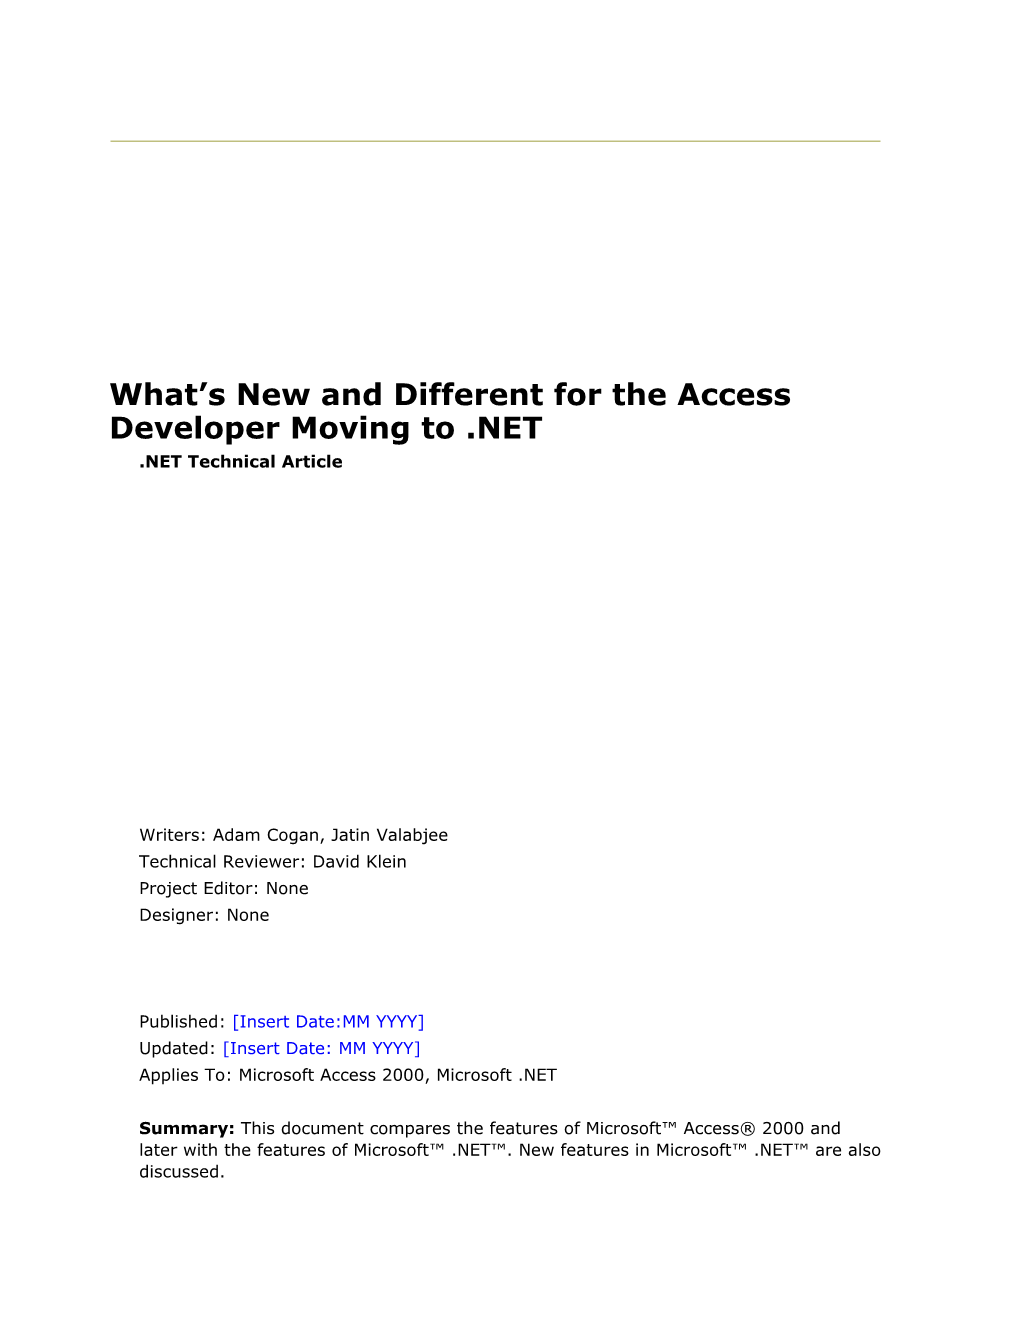 What S New and Different for the Access Developer Moving to .NET